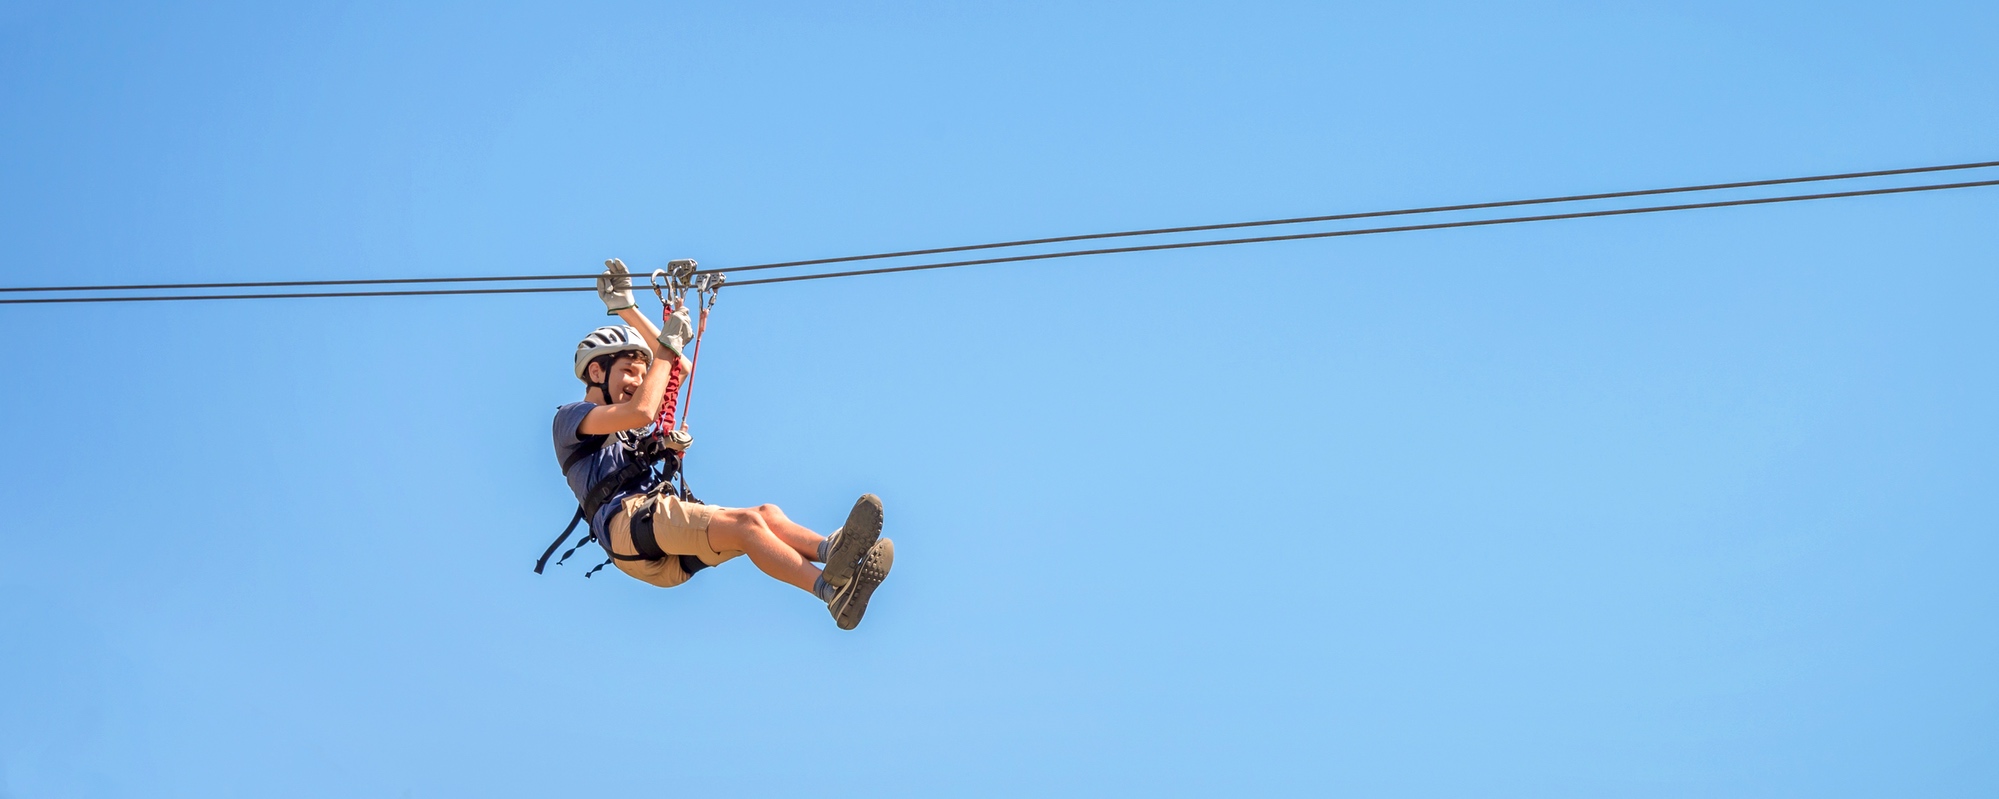 This is of an image of a single zipliner, fully geared up, soaring through the air against a cloudless blue sky backdrop.